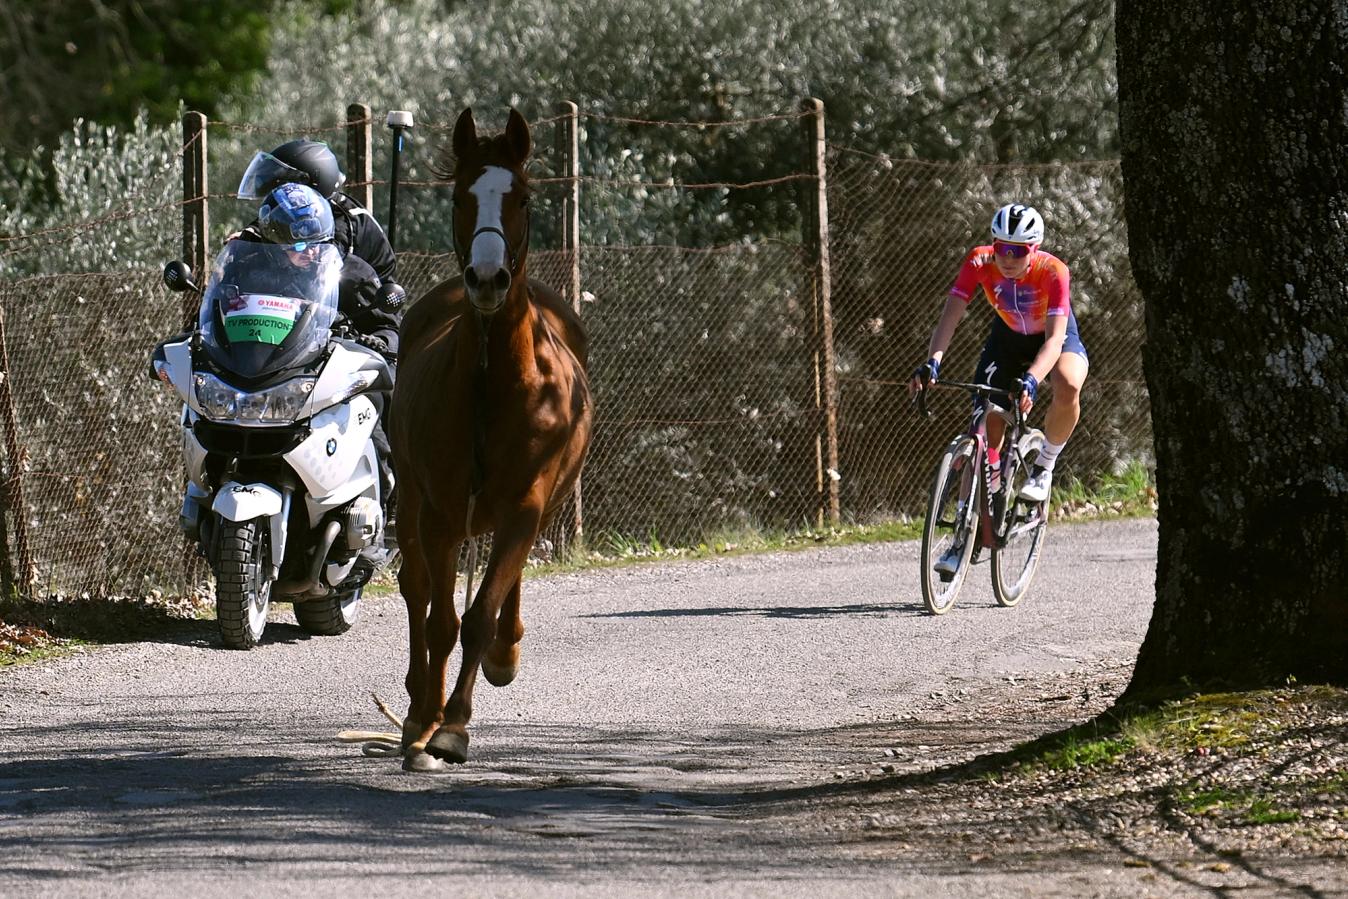 Demi Vollering has some experience excelling on dirt, including her win at Strade Bianche. She will be hoping her competitors will not have actual horsepower 